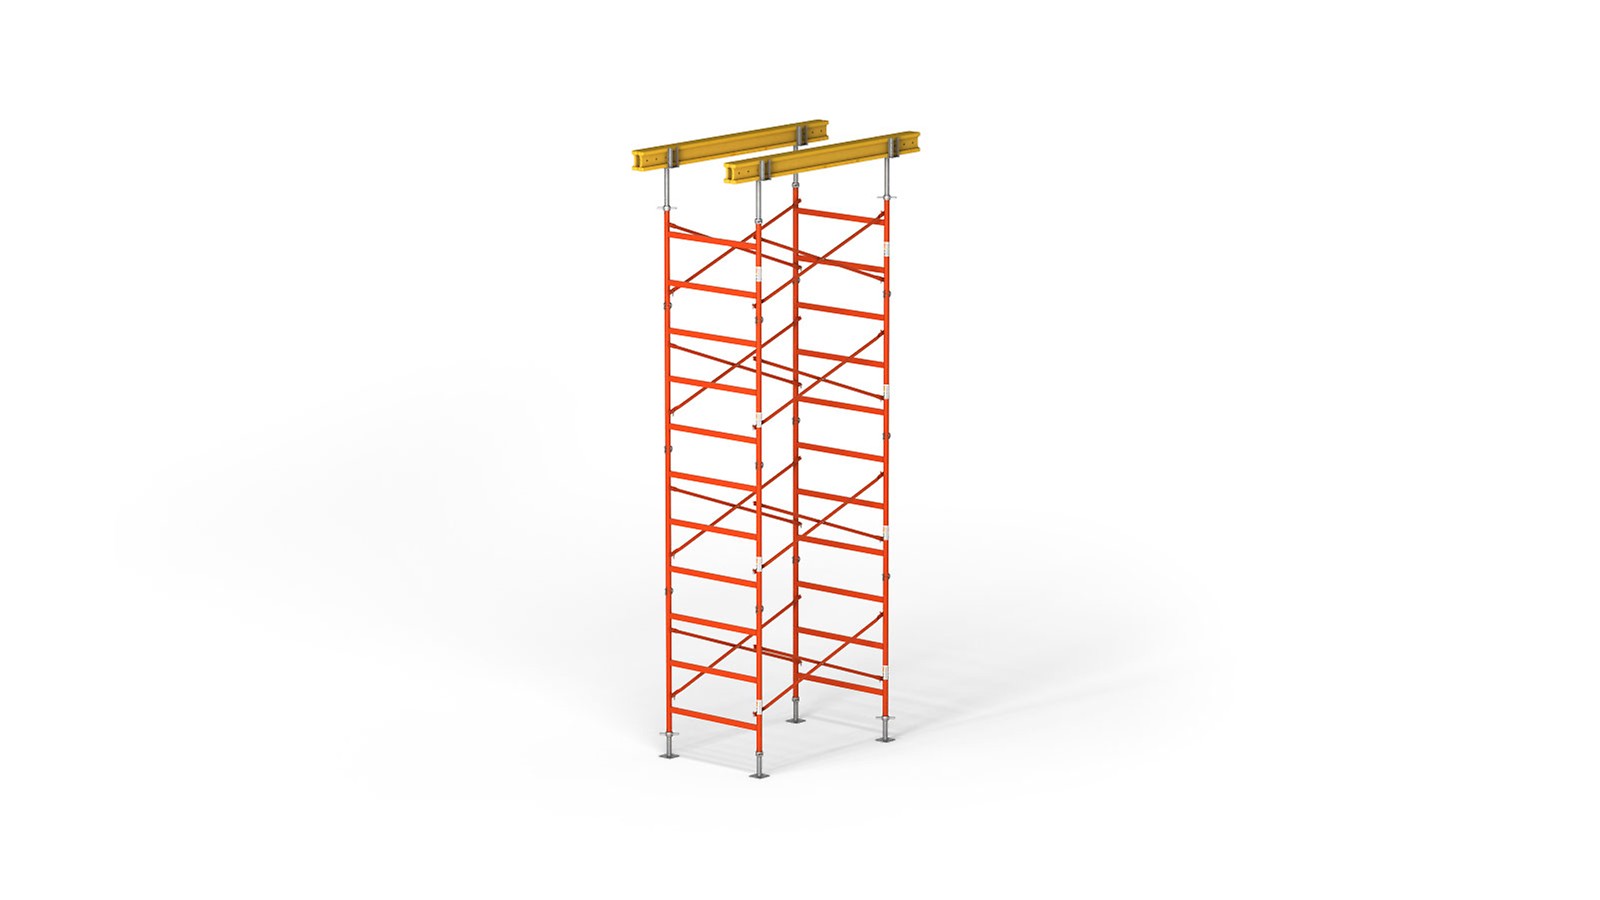 With a height of 9.65 m and a spindle extension of 0.65 m in total, a load capacity of up to 47.2 kN per post is achieved. This means you need fewer shoring towers and save material on your construction site.